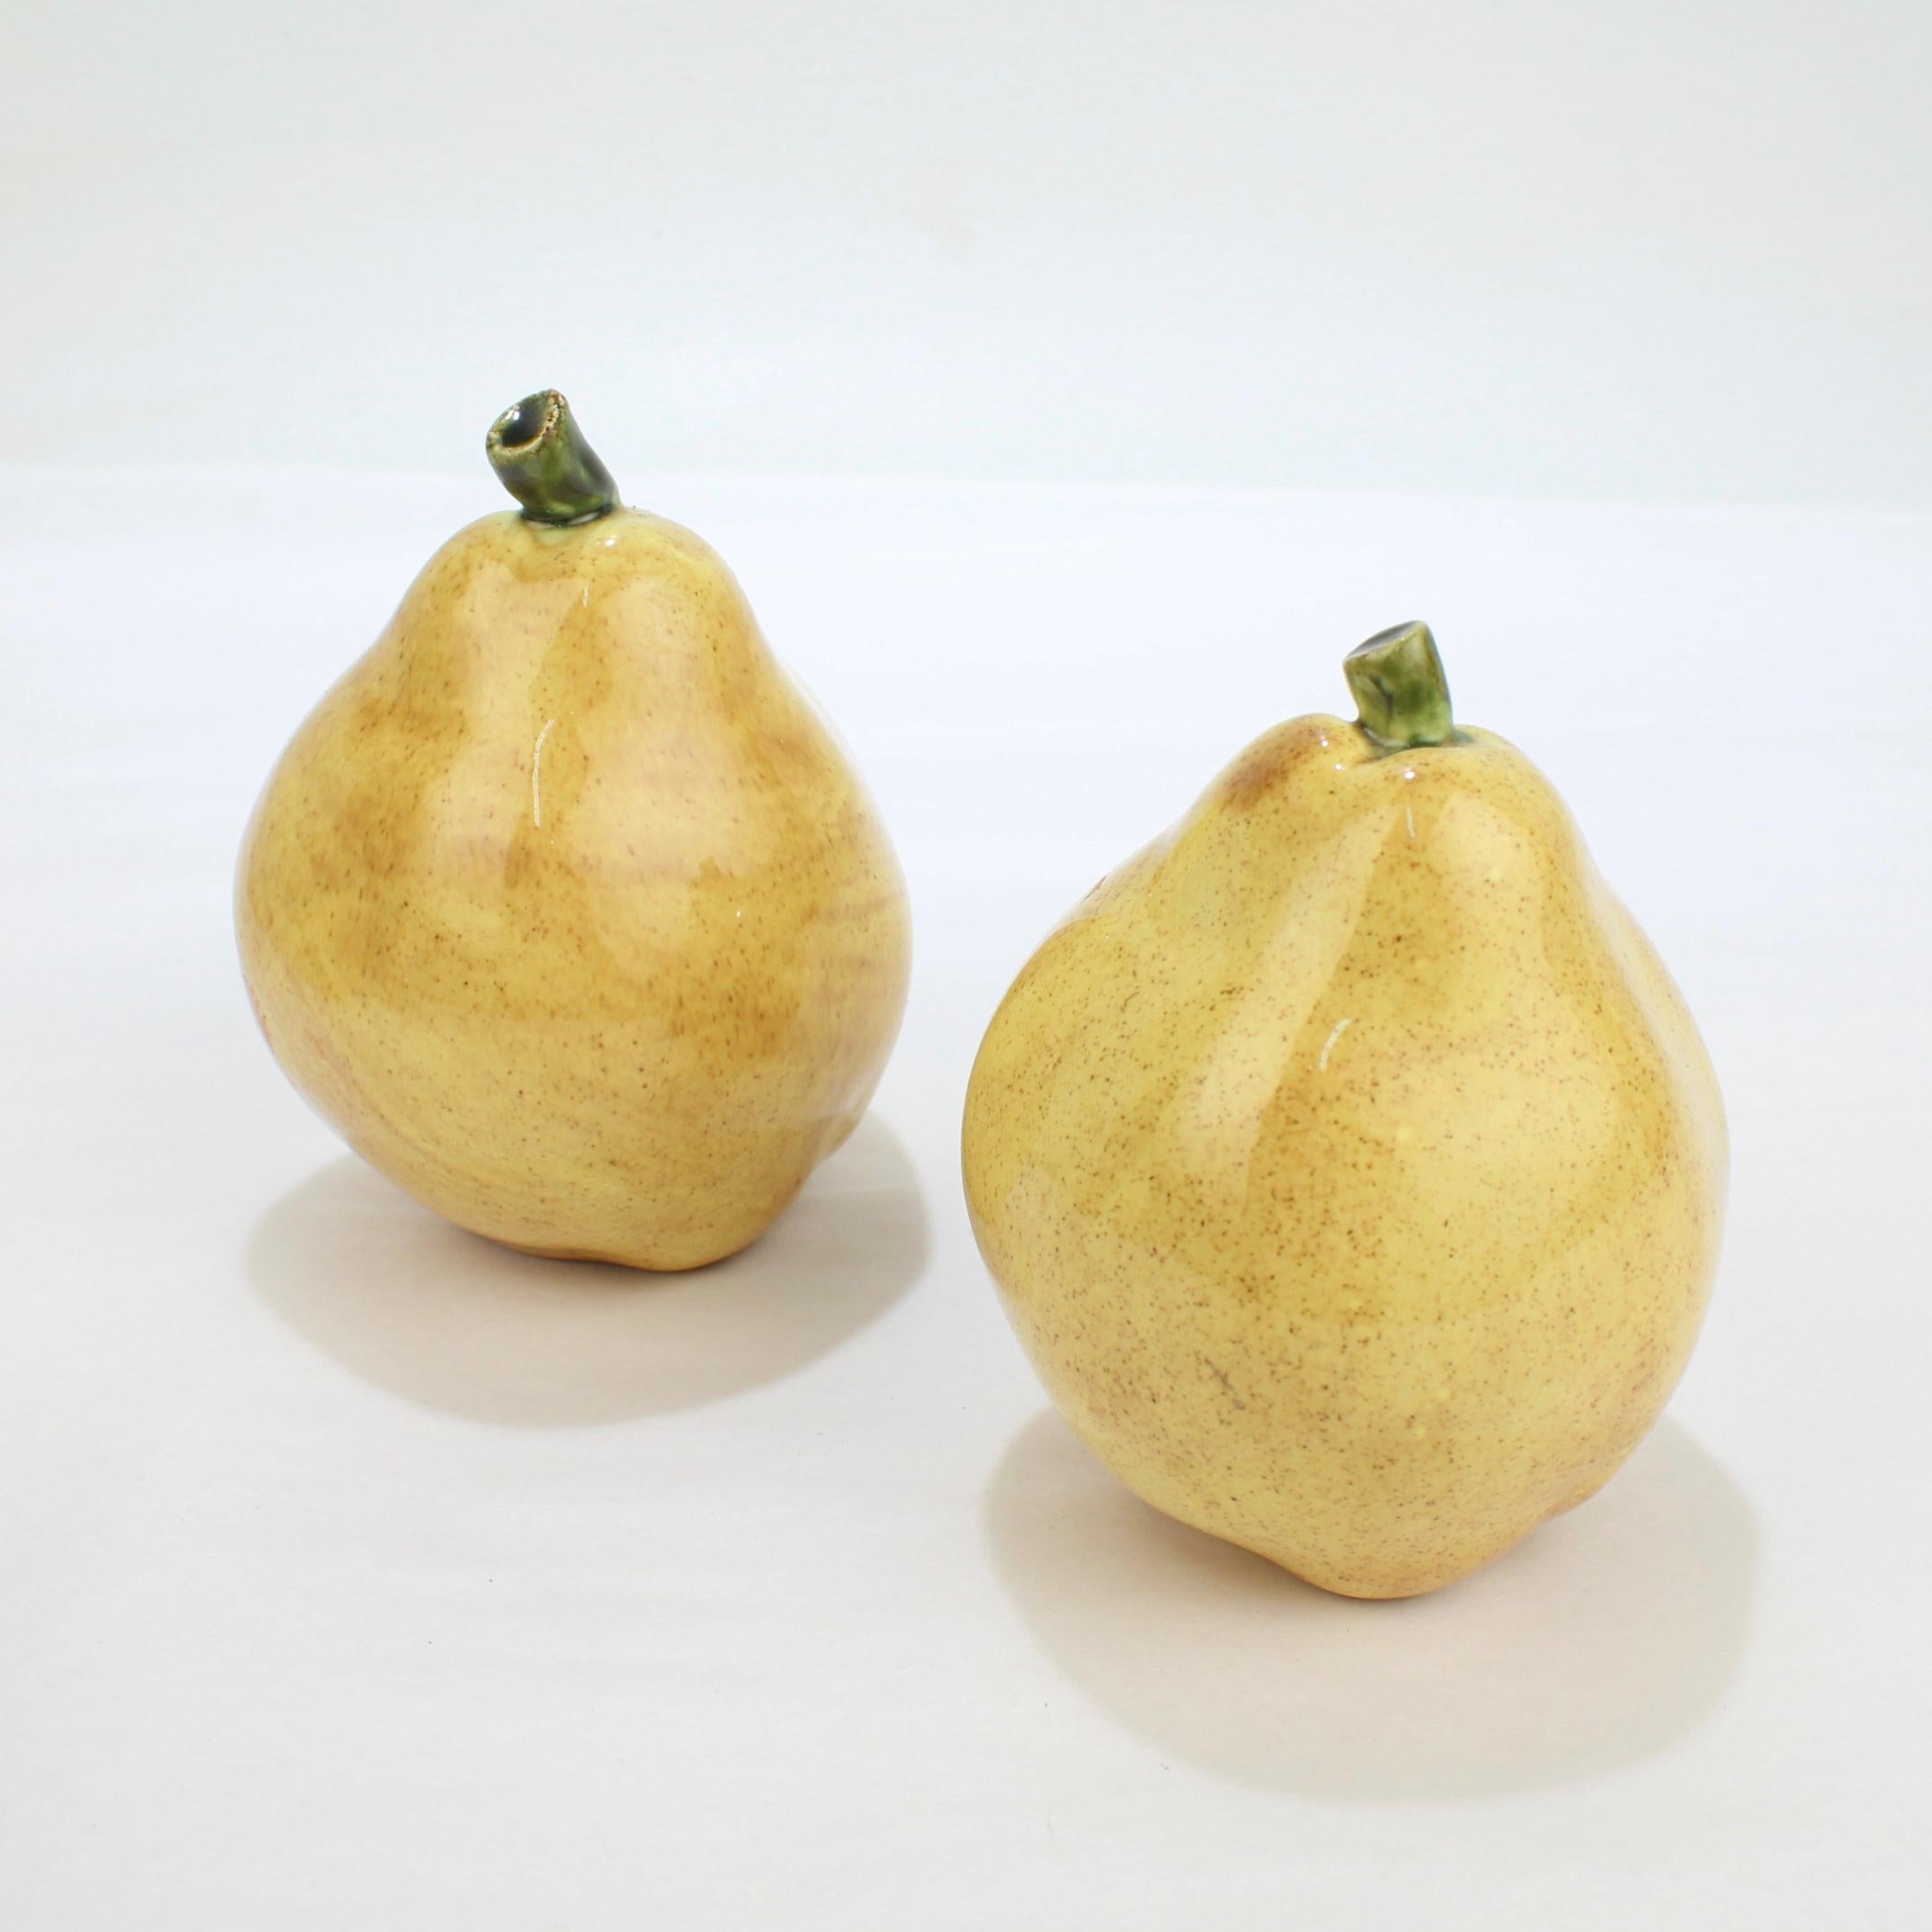 Modern 2 Pairs of Pear Shaped Yellow Pottery Salt and Pepper Shakers For Sale